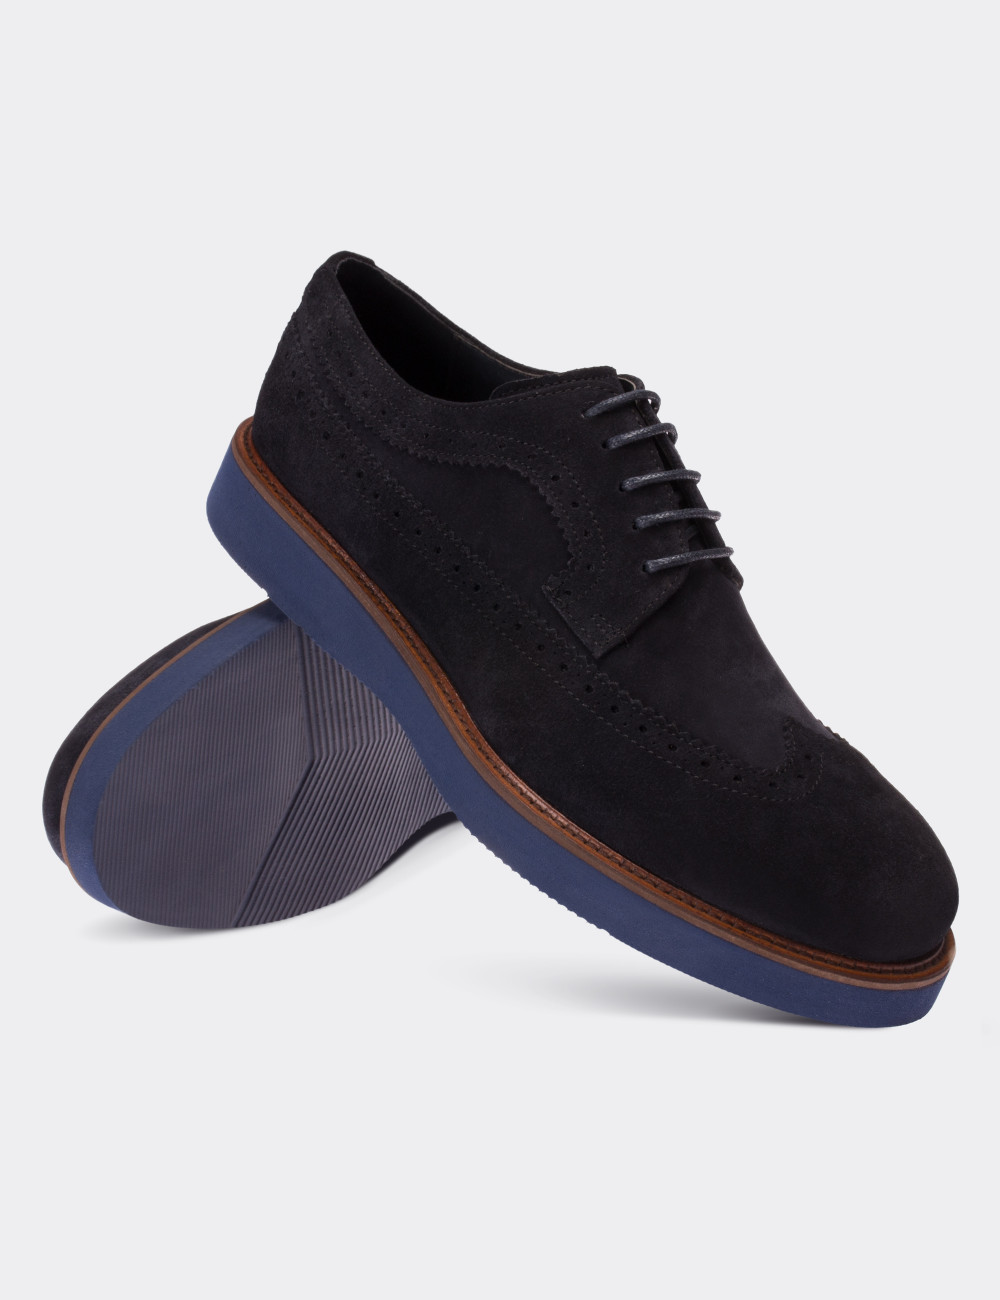 Navy Suede Leather Lace-up Shoes - 01293MLCVE29